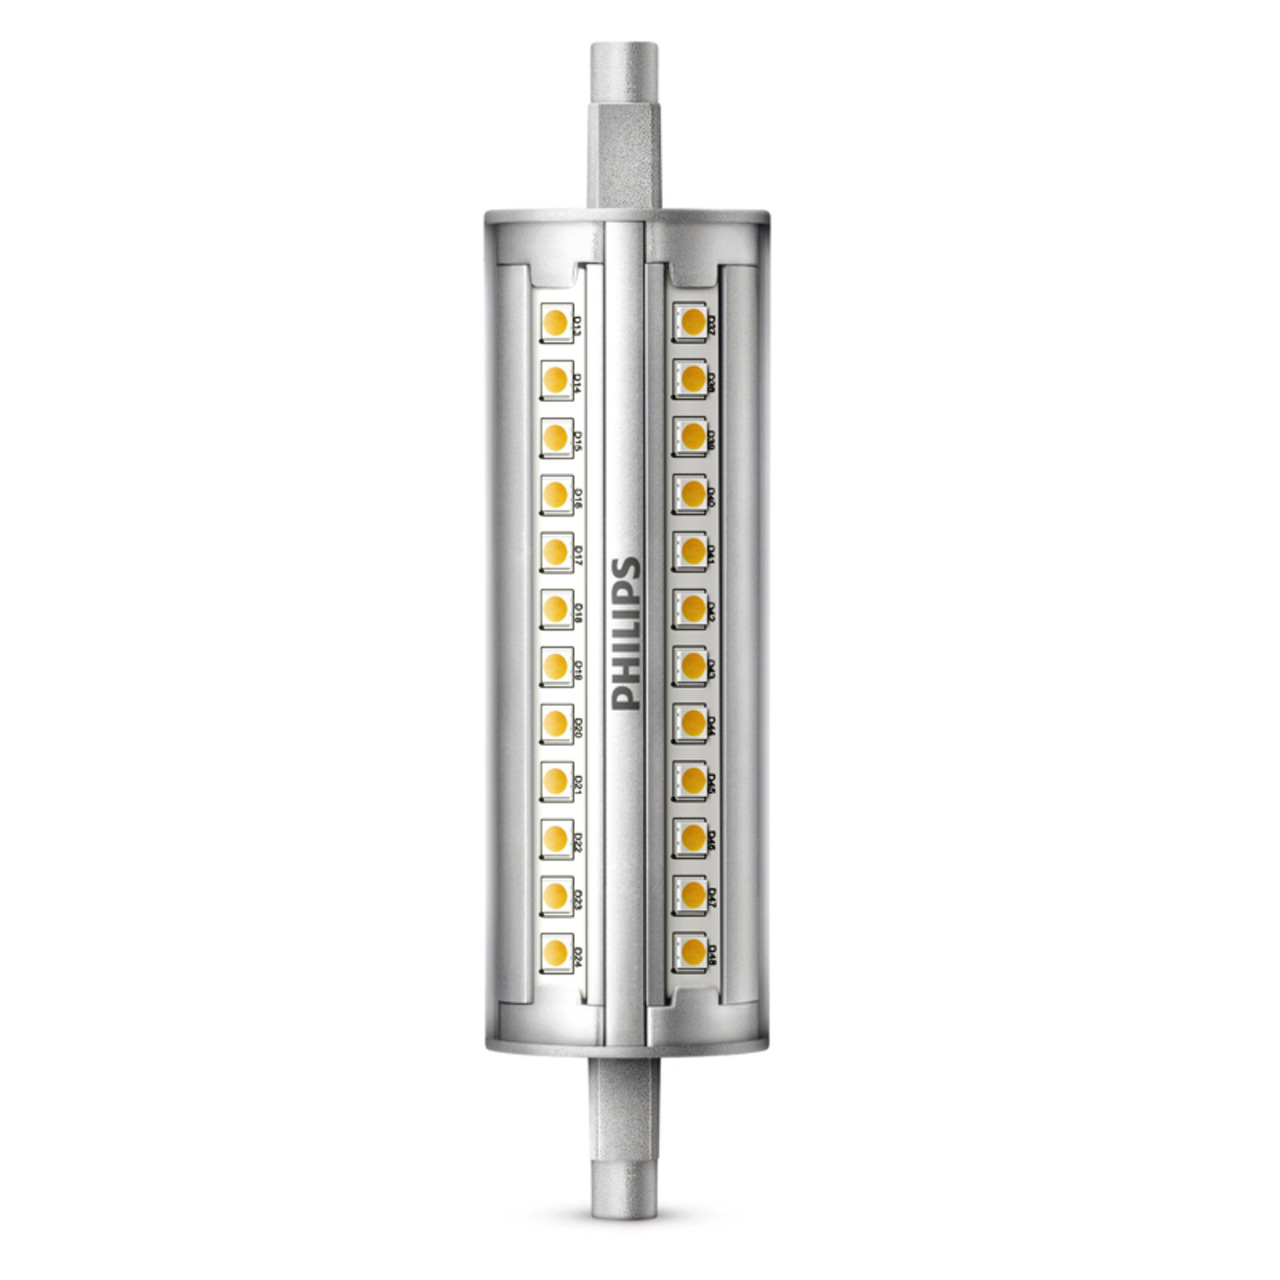 Philips CorePro LED 14-W-R7s-LED-Lampe 118mm- warmweiss- dimmbar